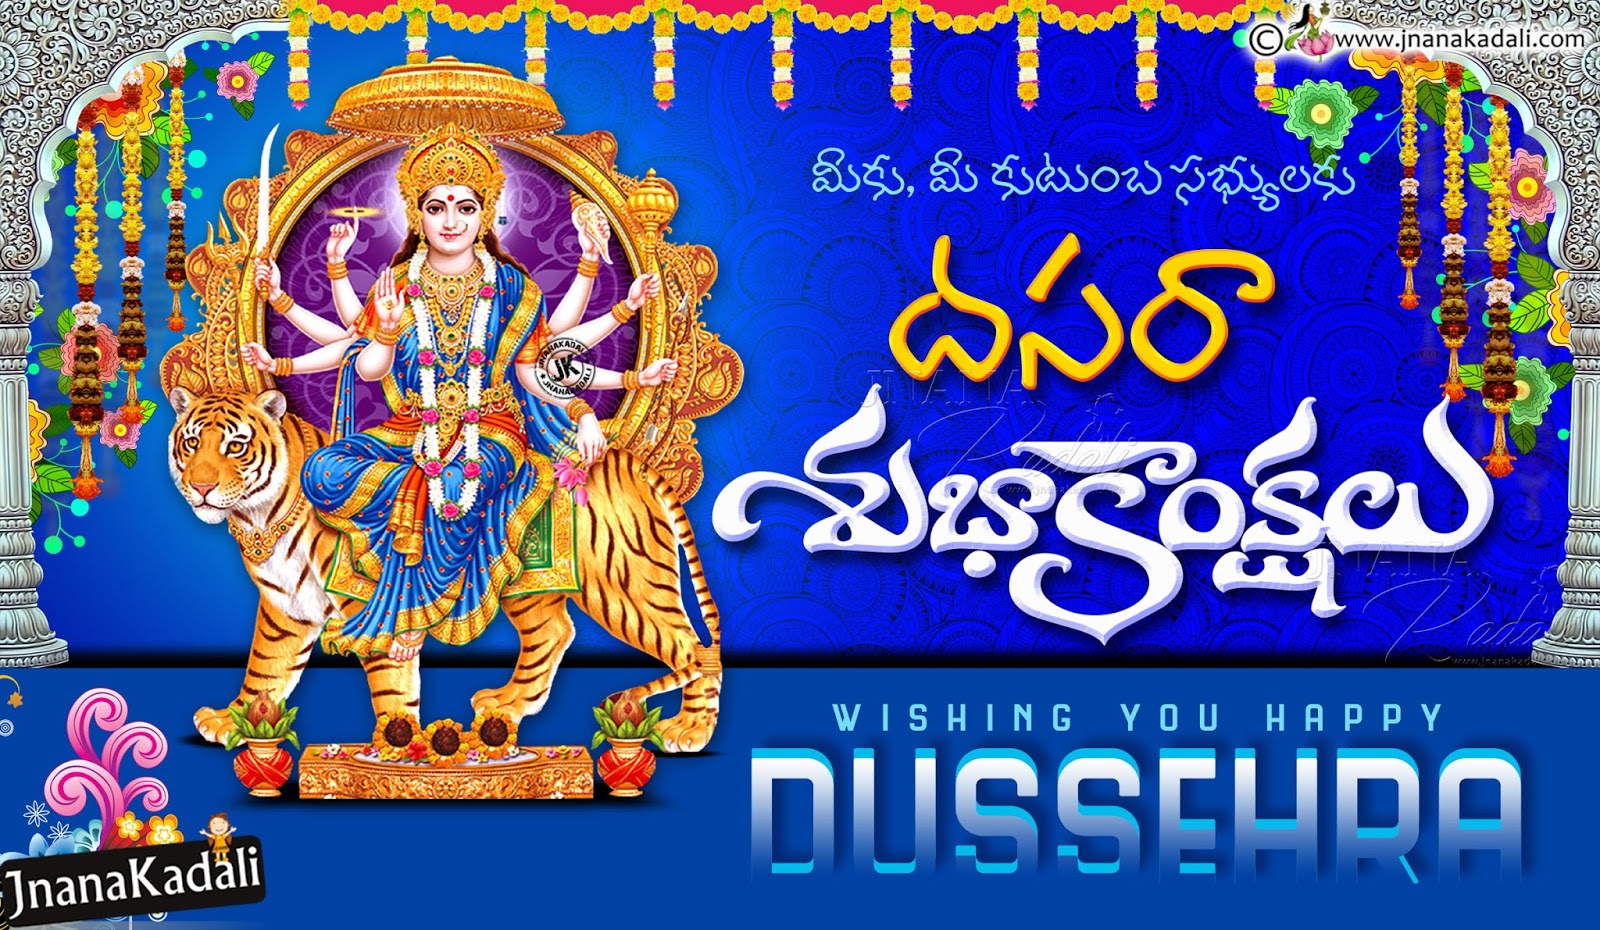 Dussehra Wishes Images In Telugu, Whats App Sharing - Dussehra 2017 Images In Telugu - HD Wallpaper 